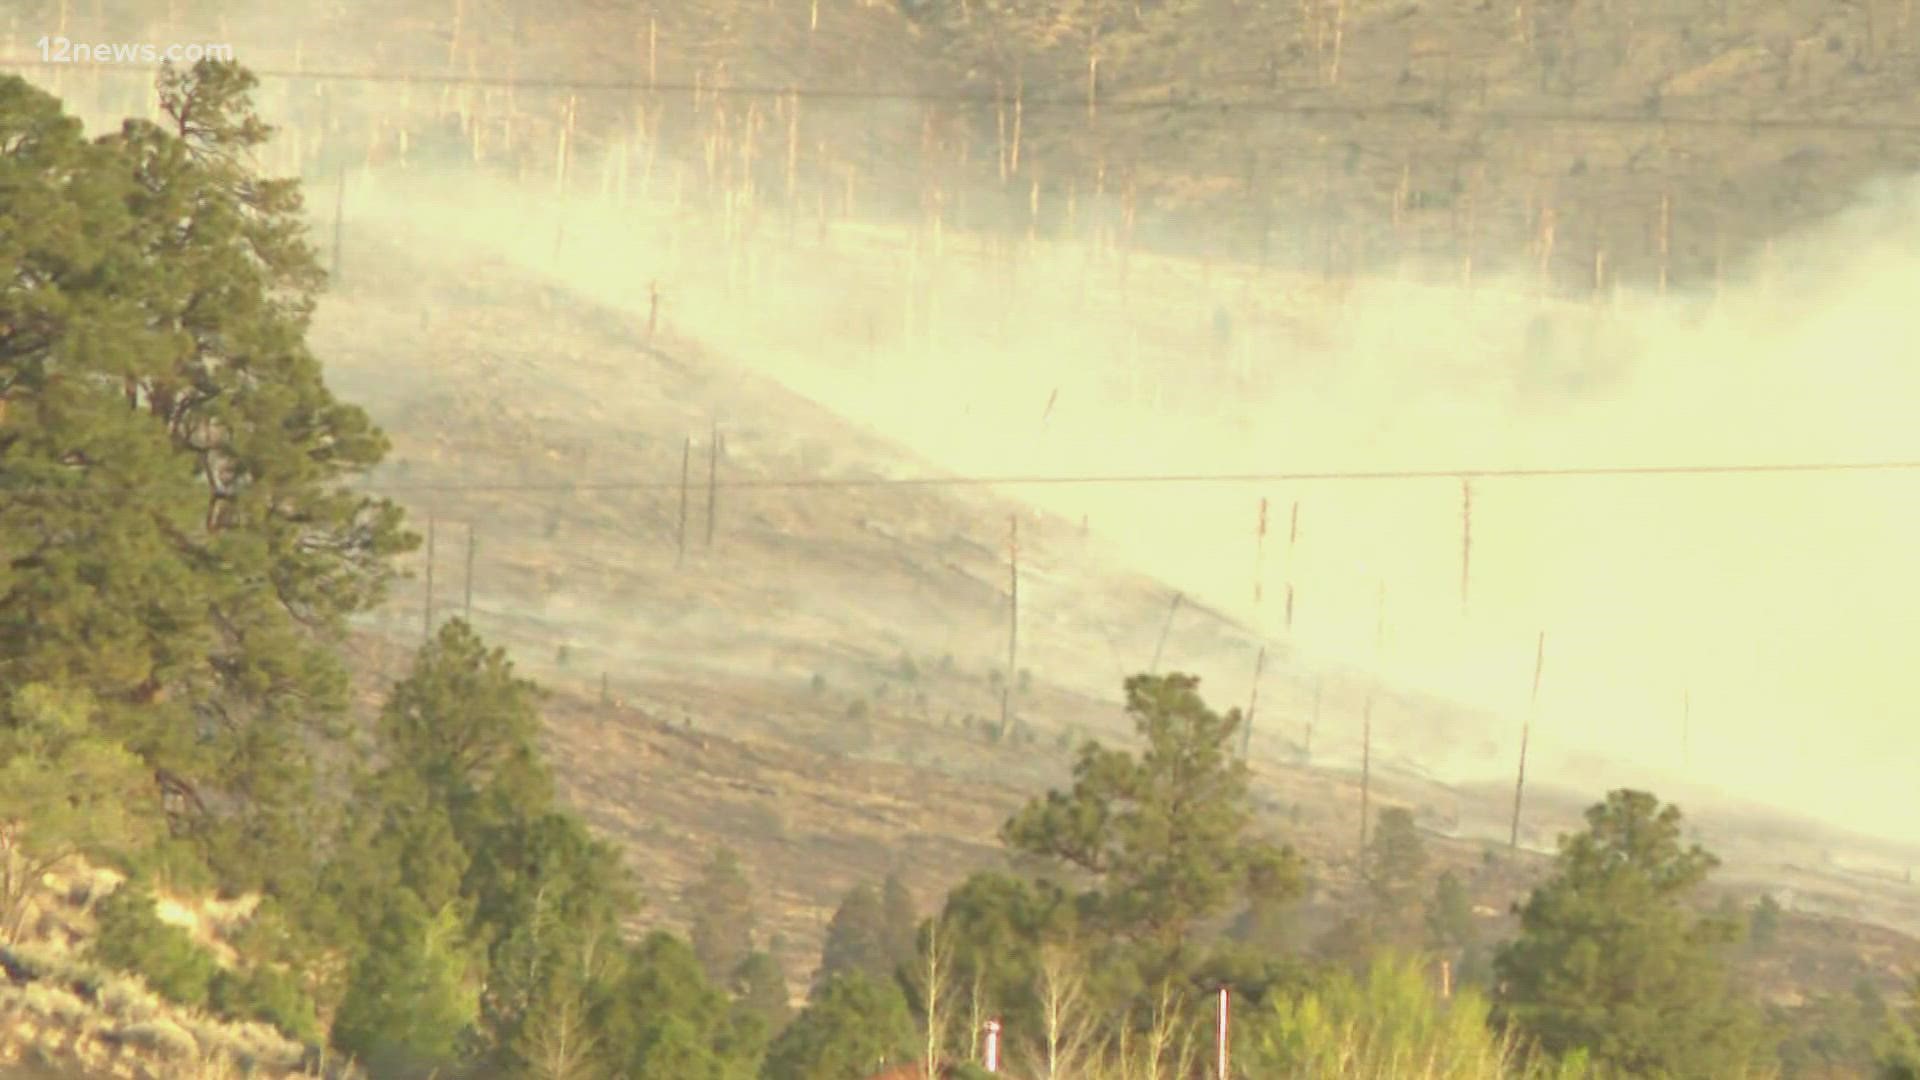 Fire have spread to areas not previously seen overnight as more residents work to evacuate from the area, fire officials said.